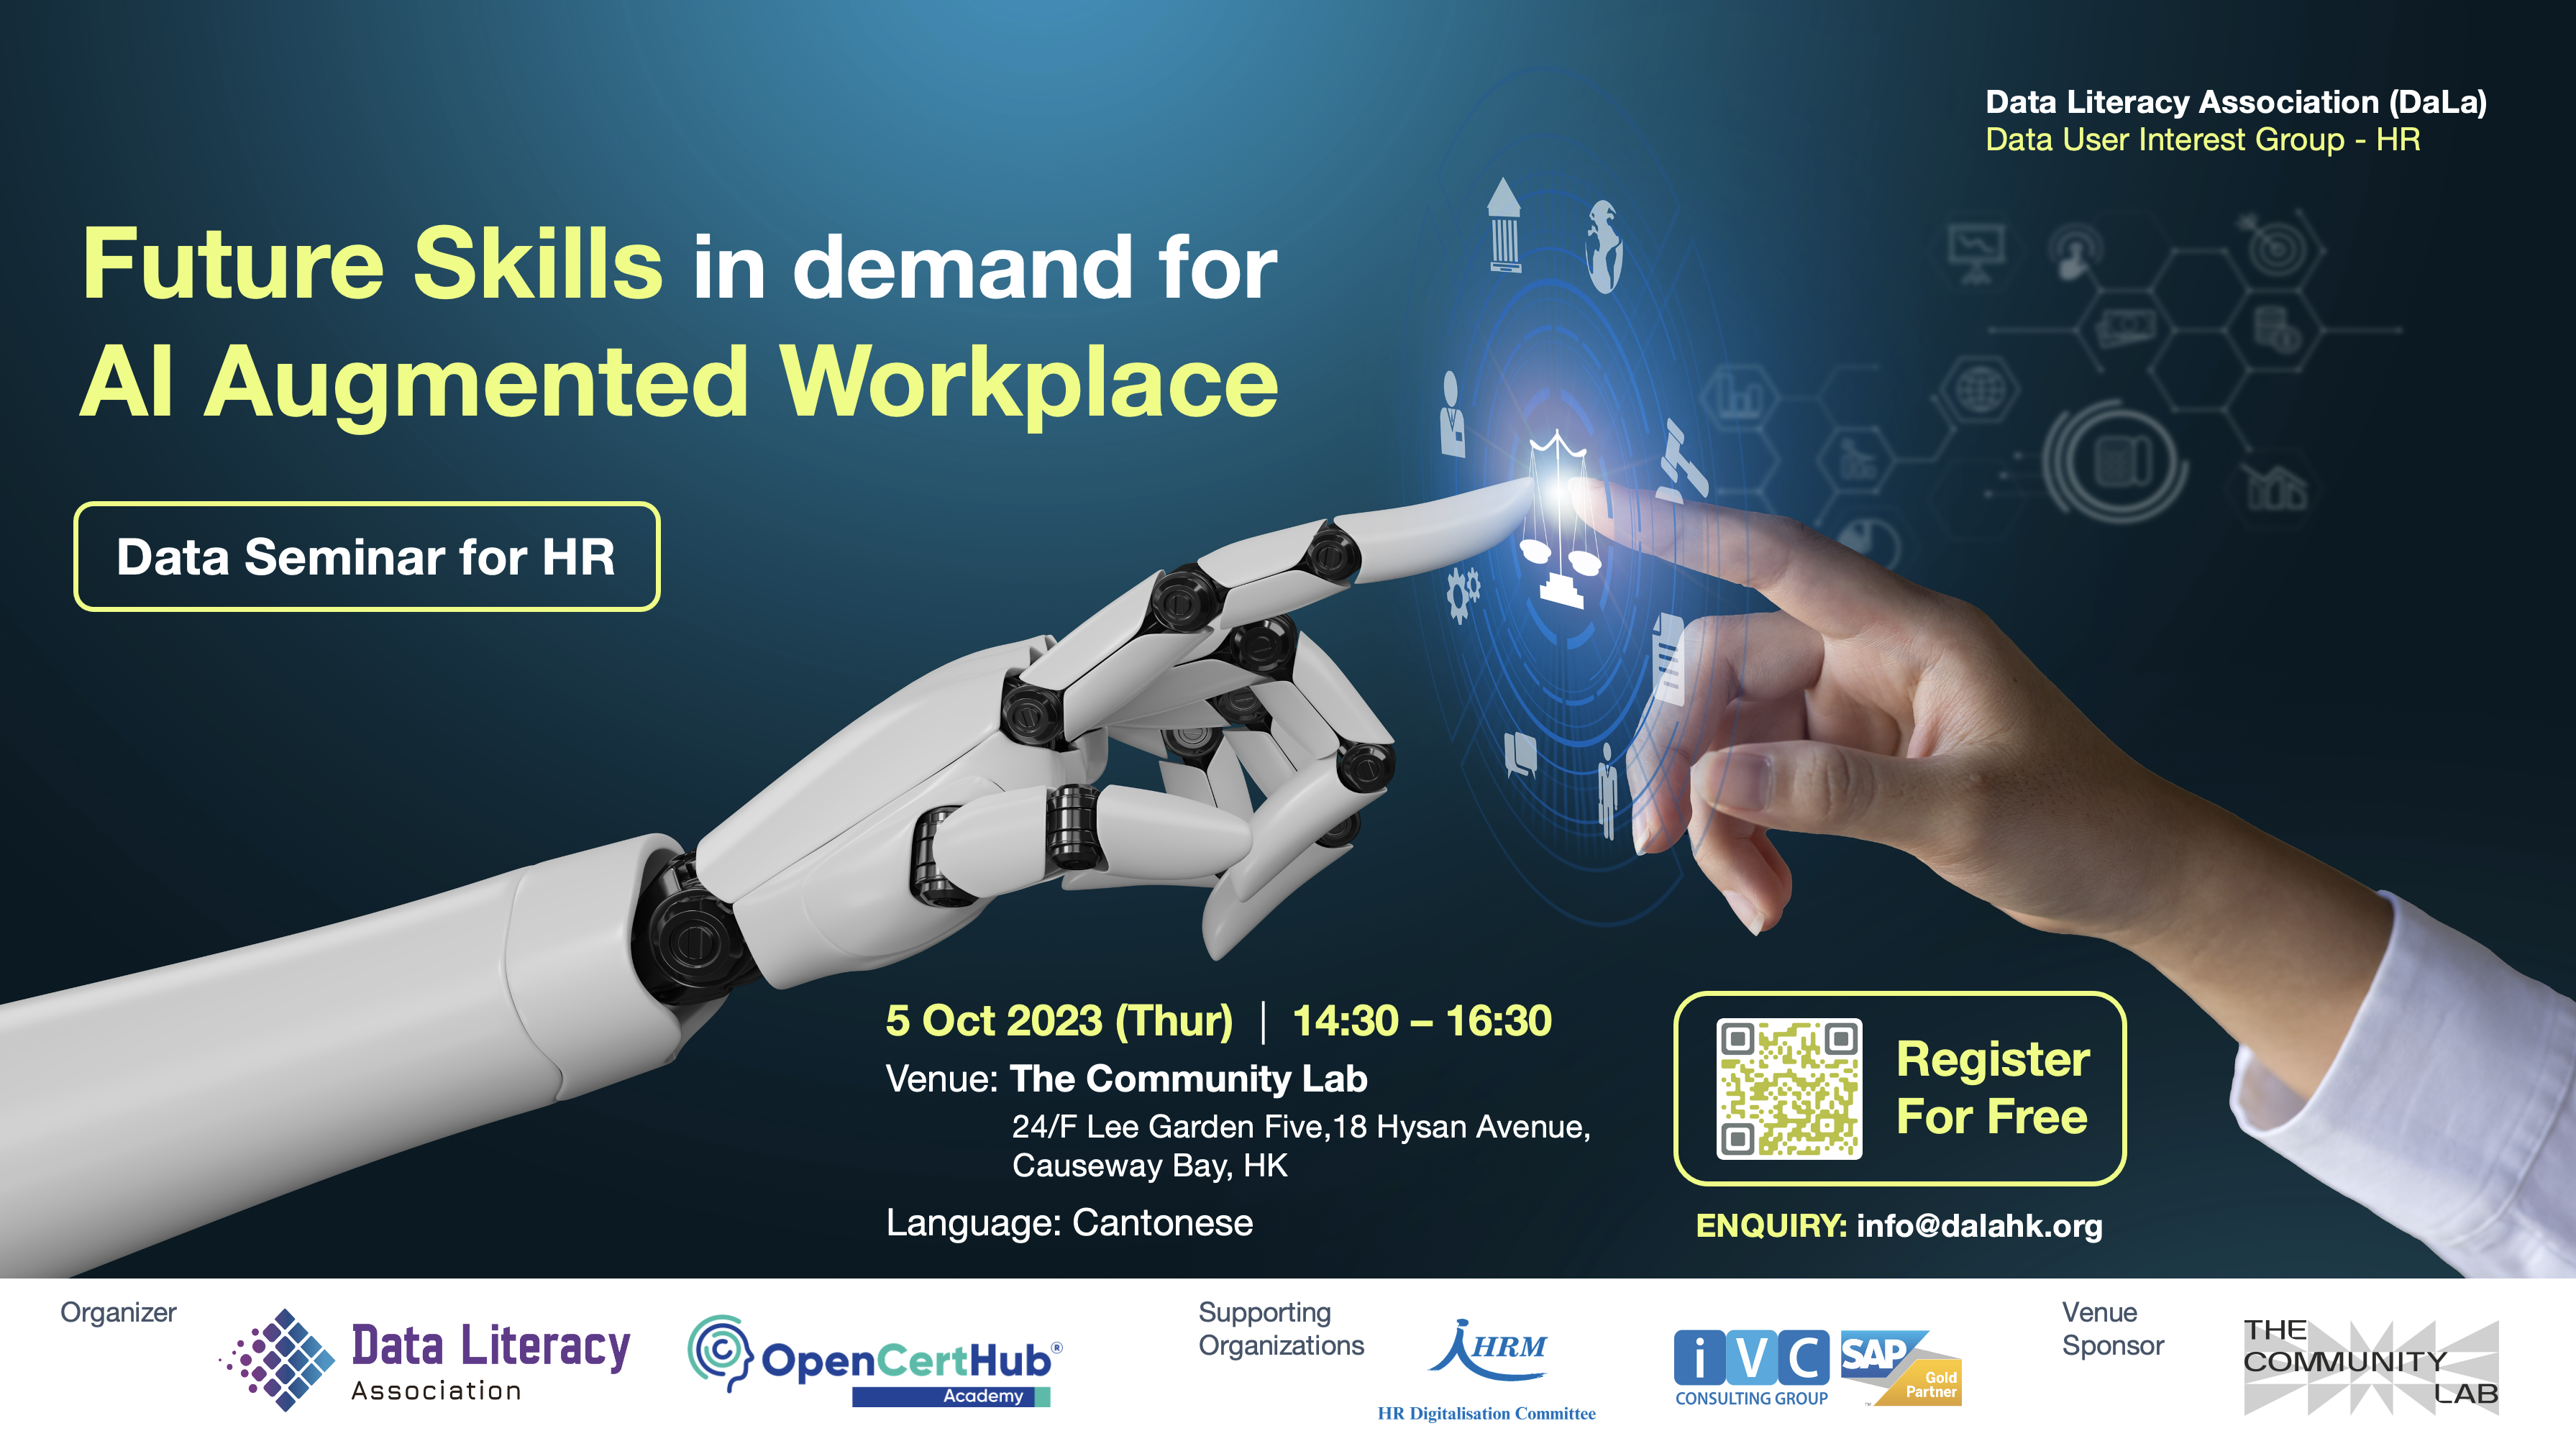 Data Seminar for HR – “Future Skills in demand for AI Augmented Workplace”